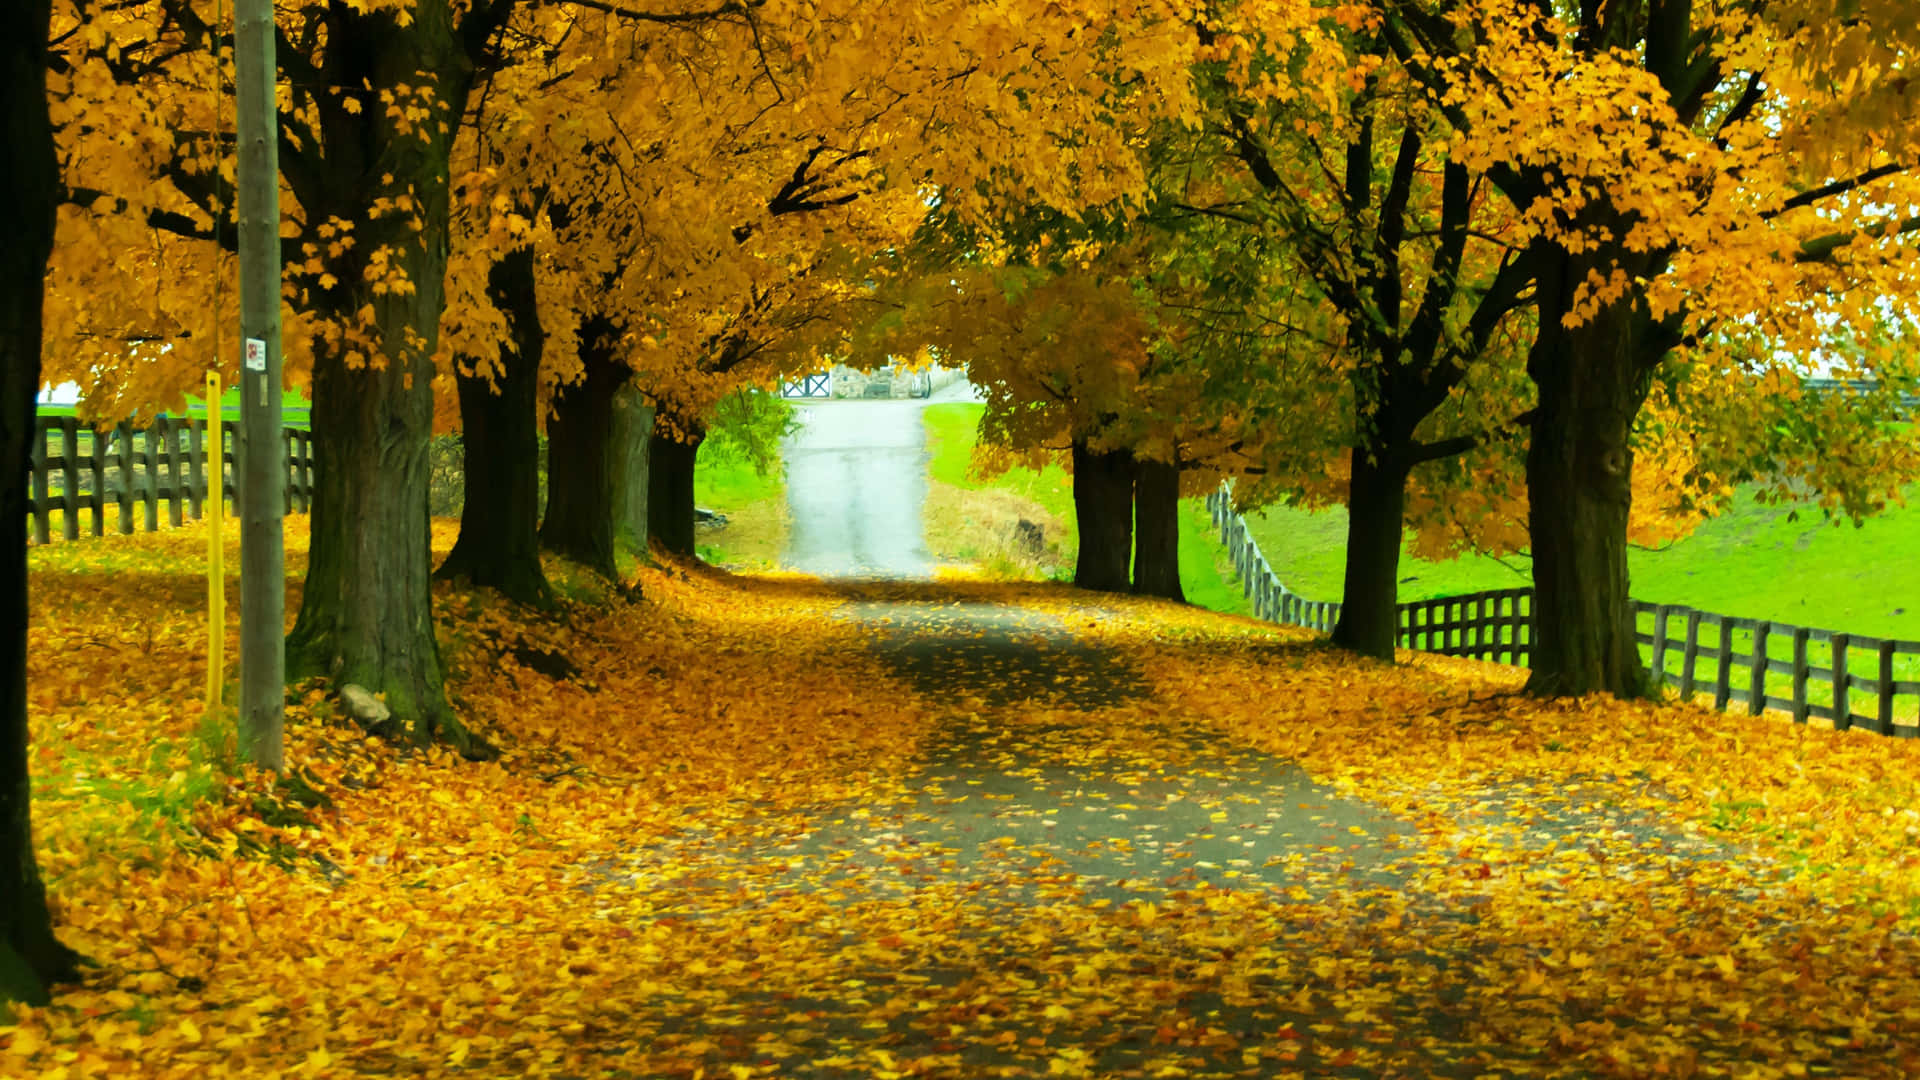 Vibrant Yellow Leaves on a Crisp Autumn Day Wallpaper